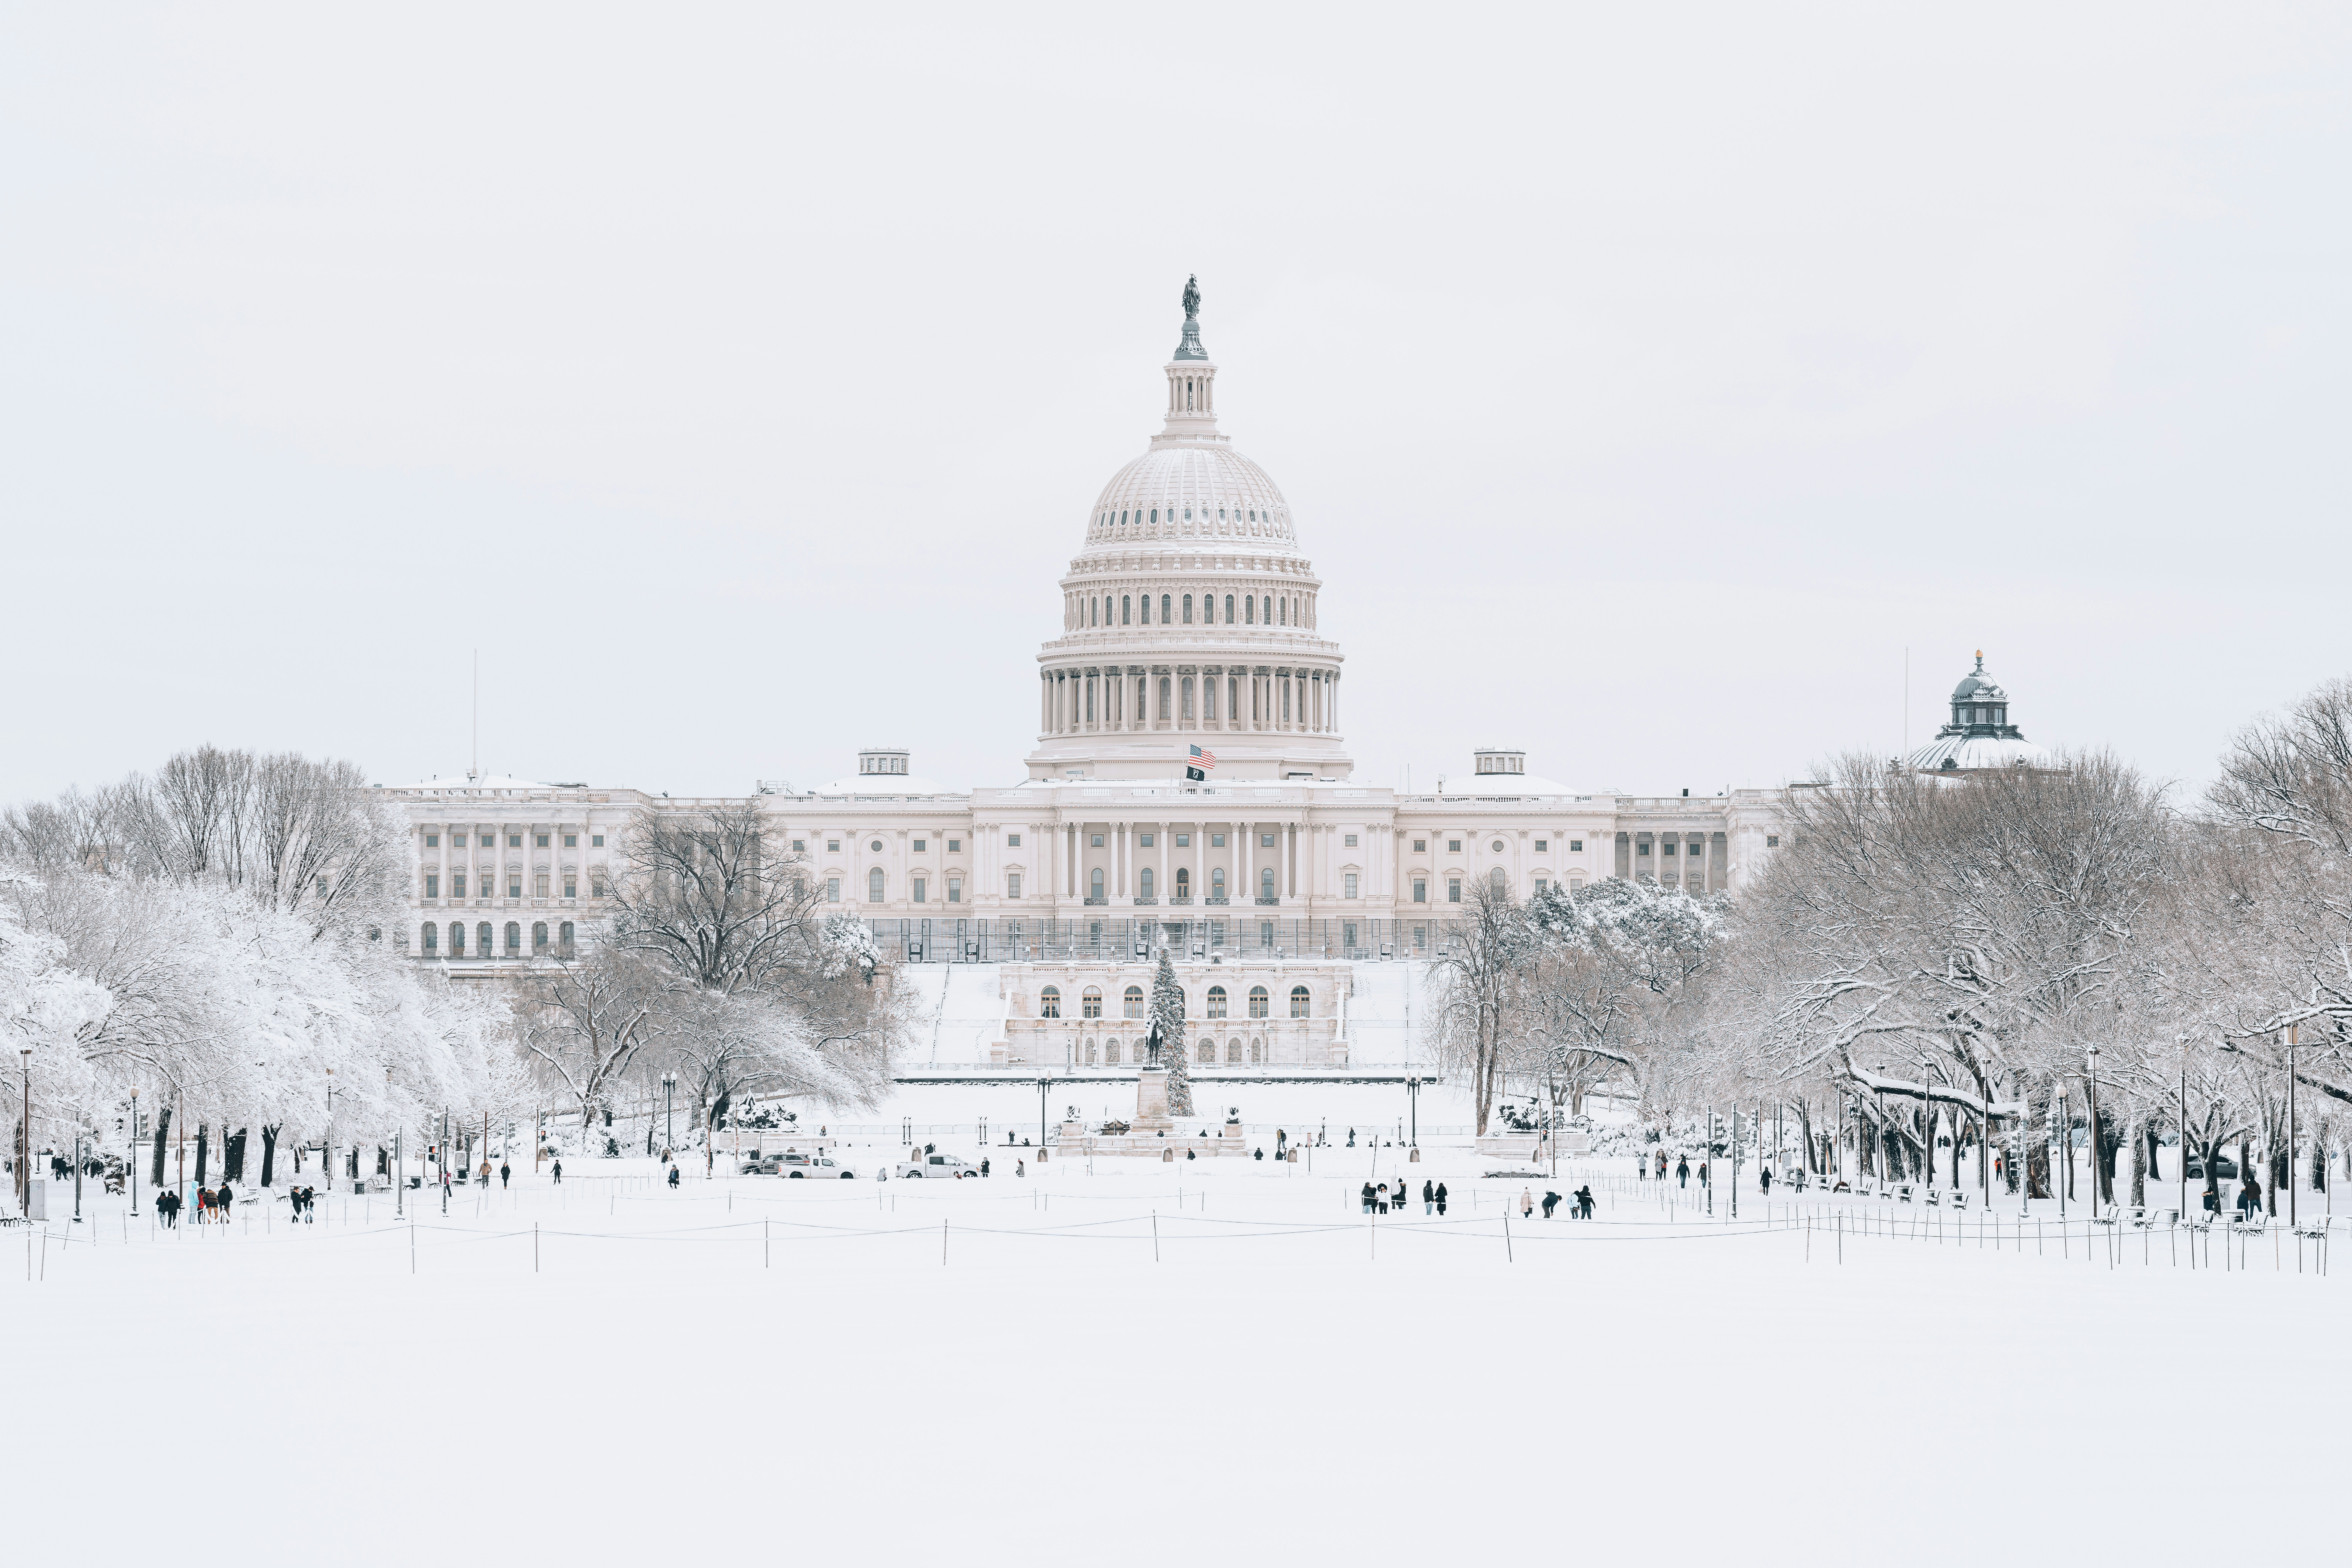 US Capitol Building with lawn covered in snow